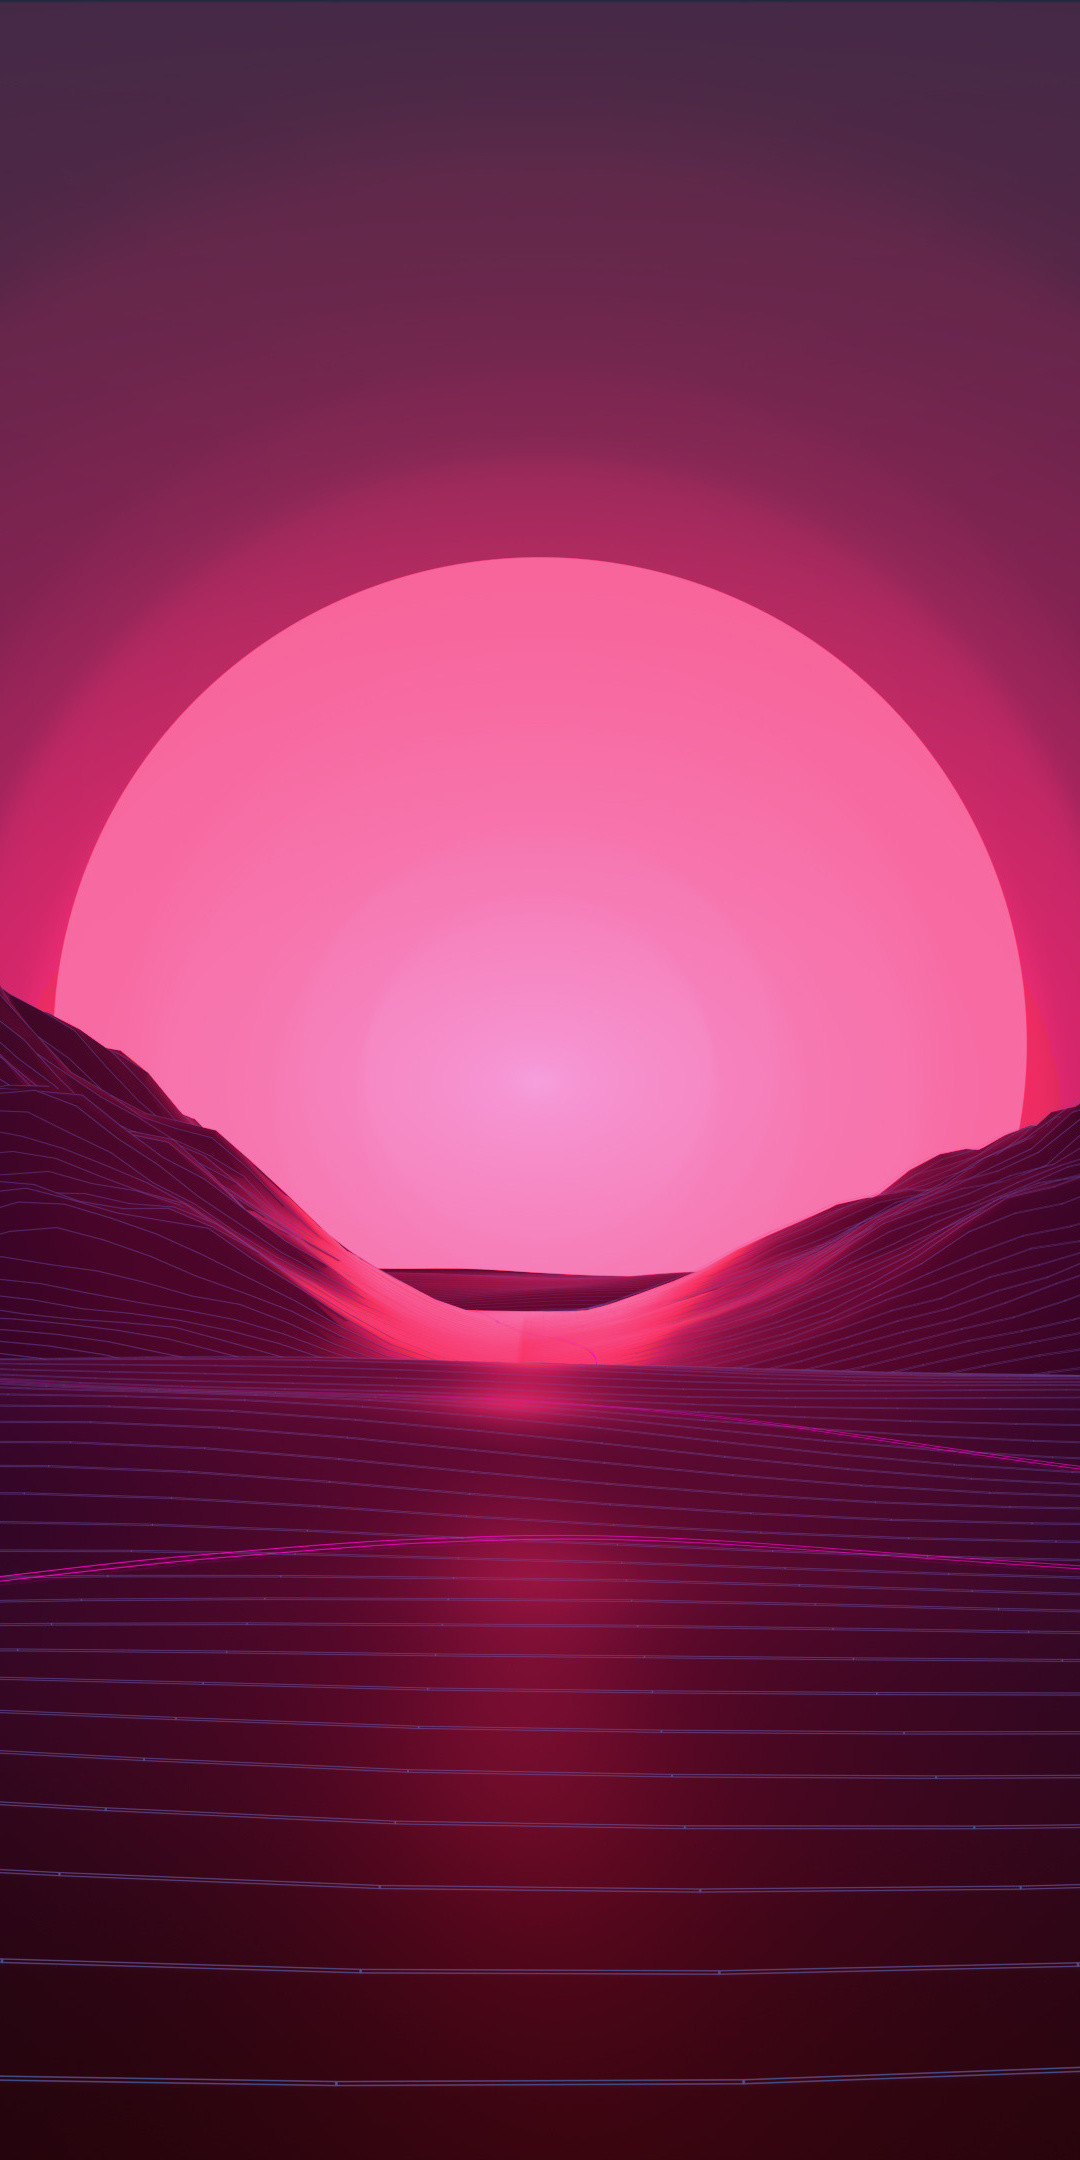 1080x2160 Sunset, mountains, neon pink, abstract,  wallpaper